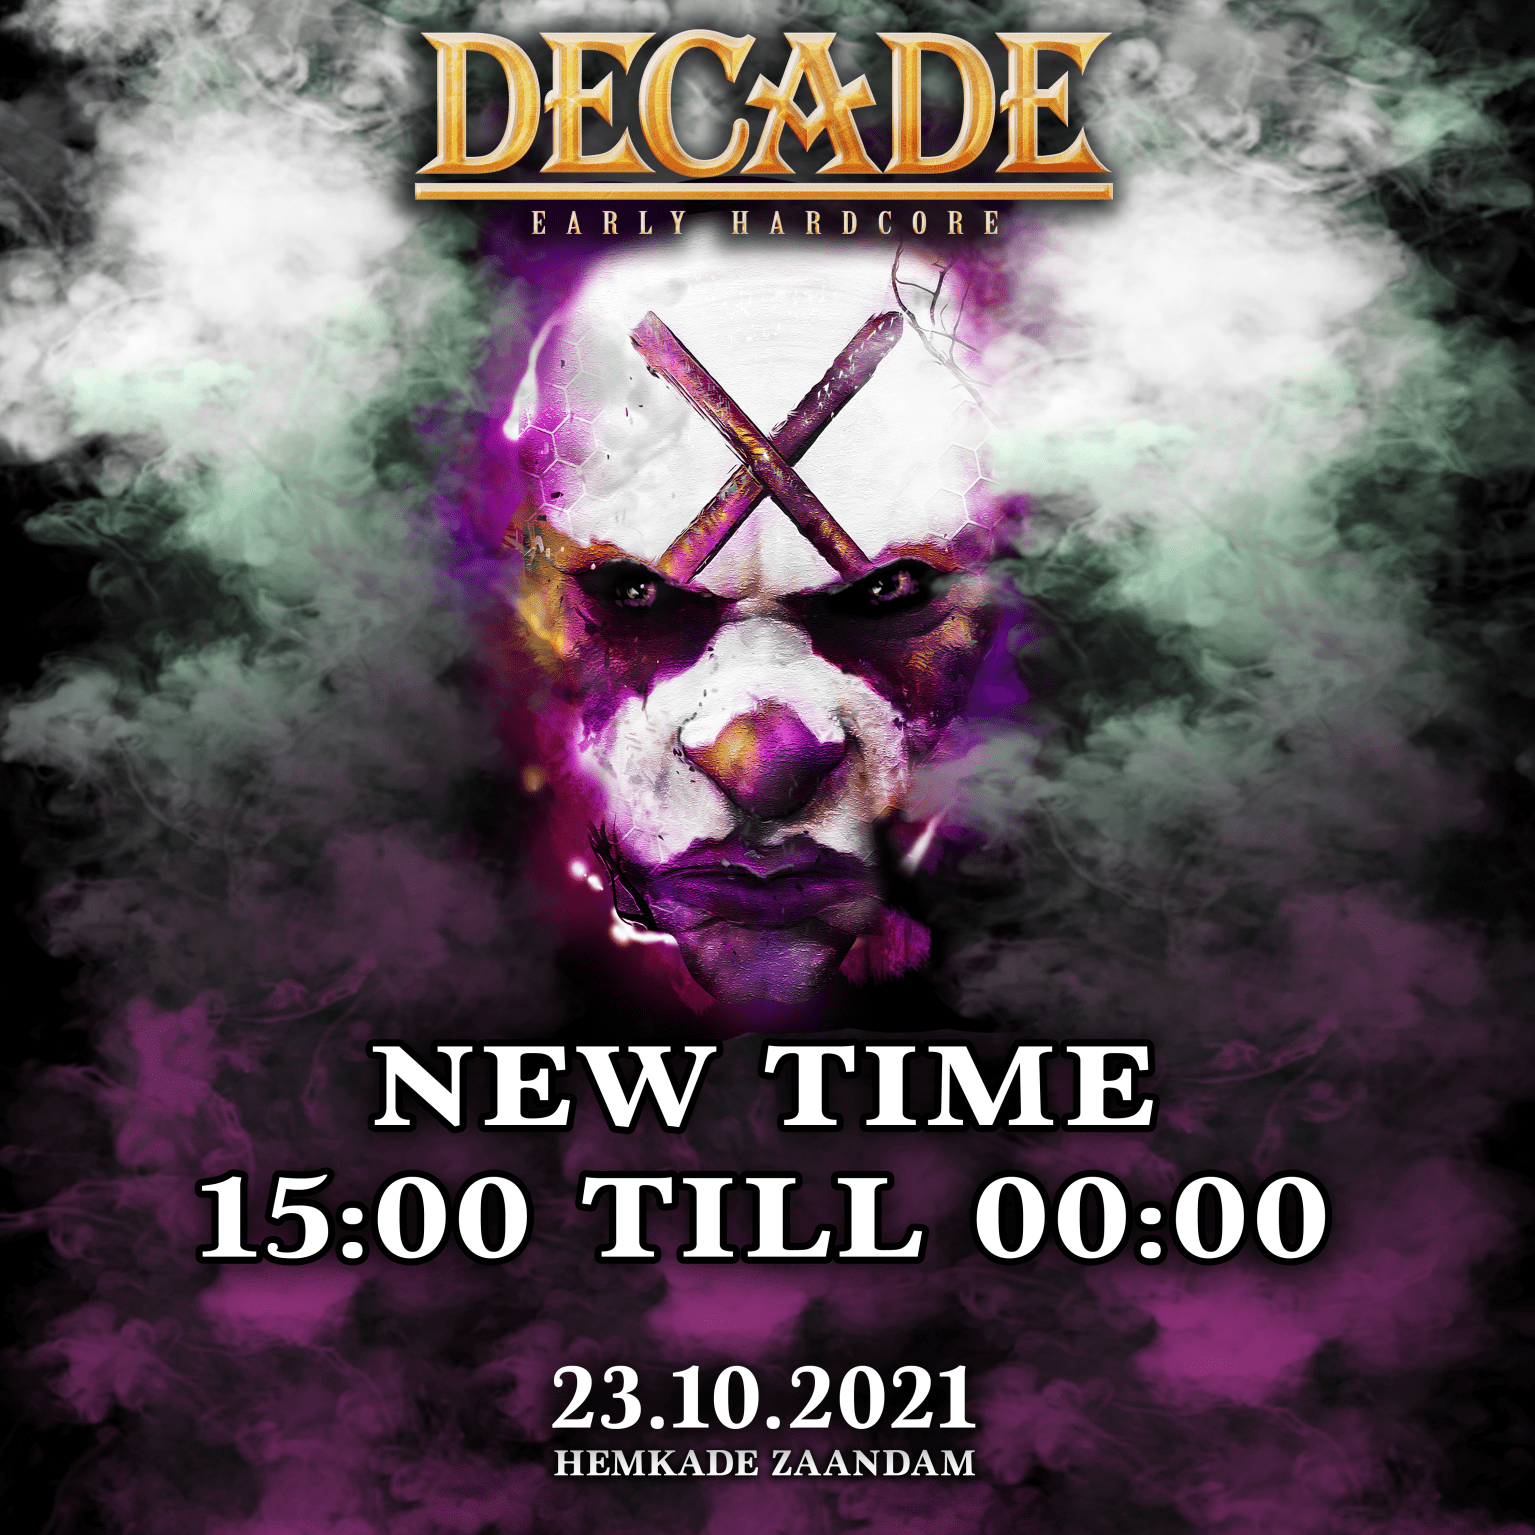 New Time Decade of early Hardcore 2021